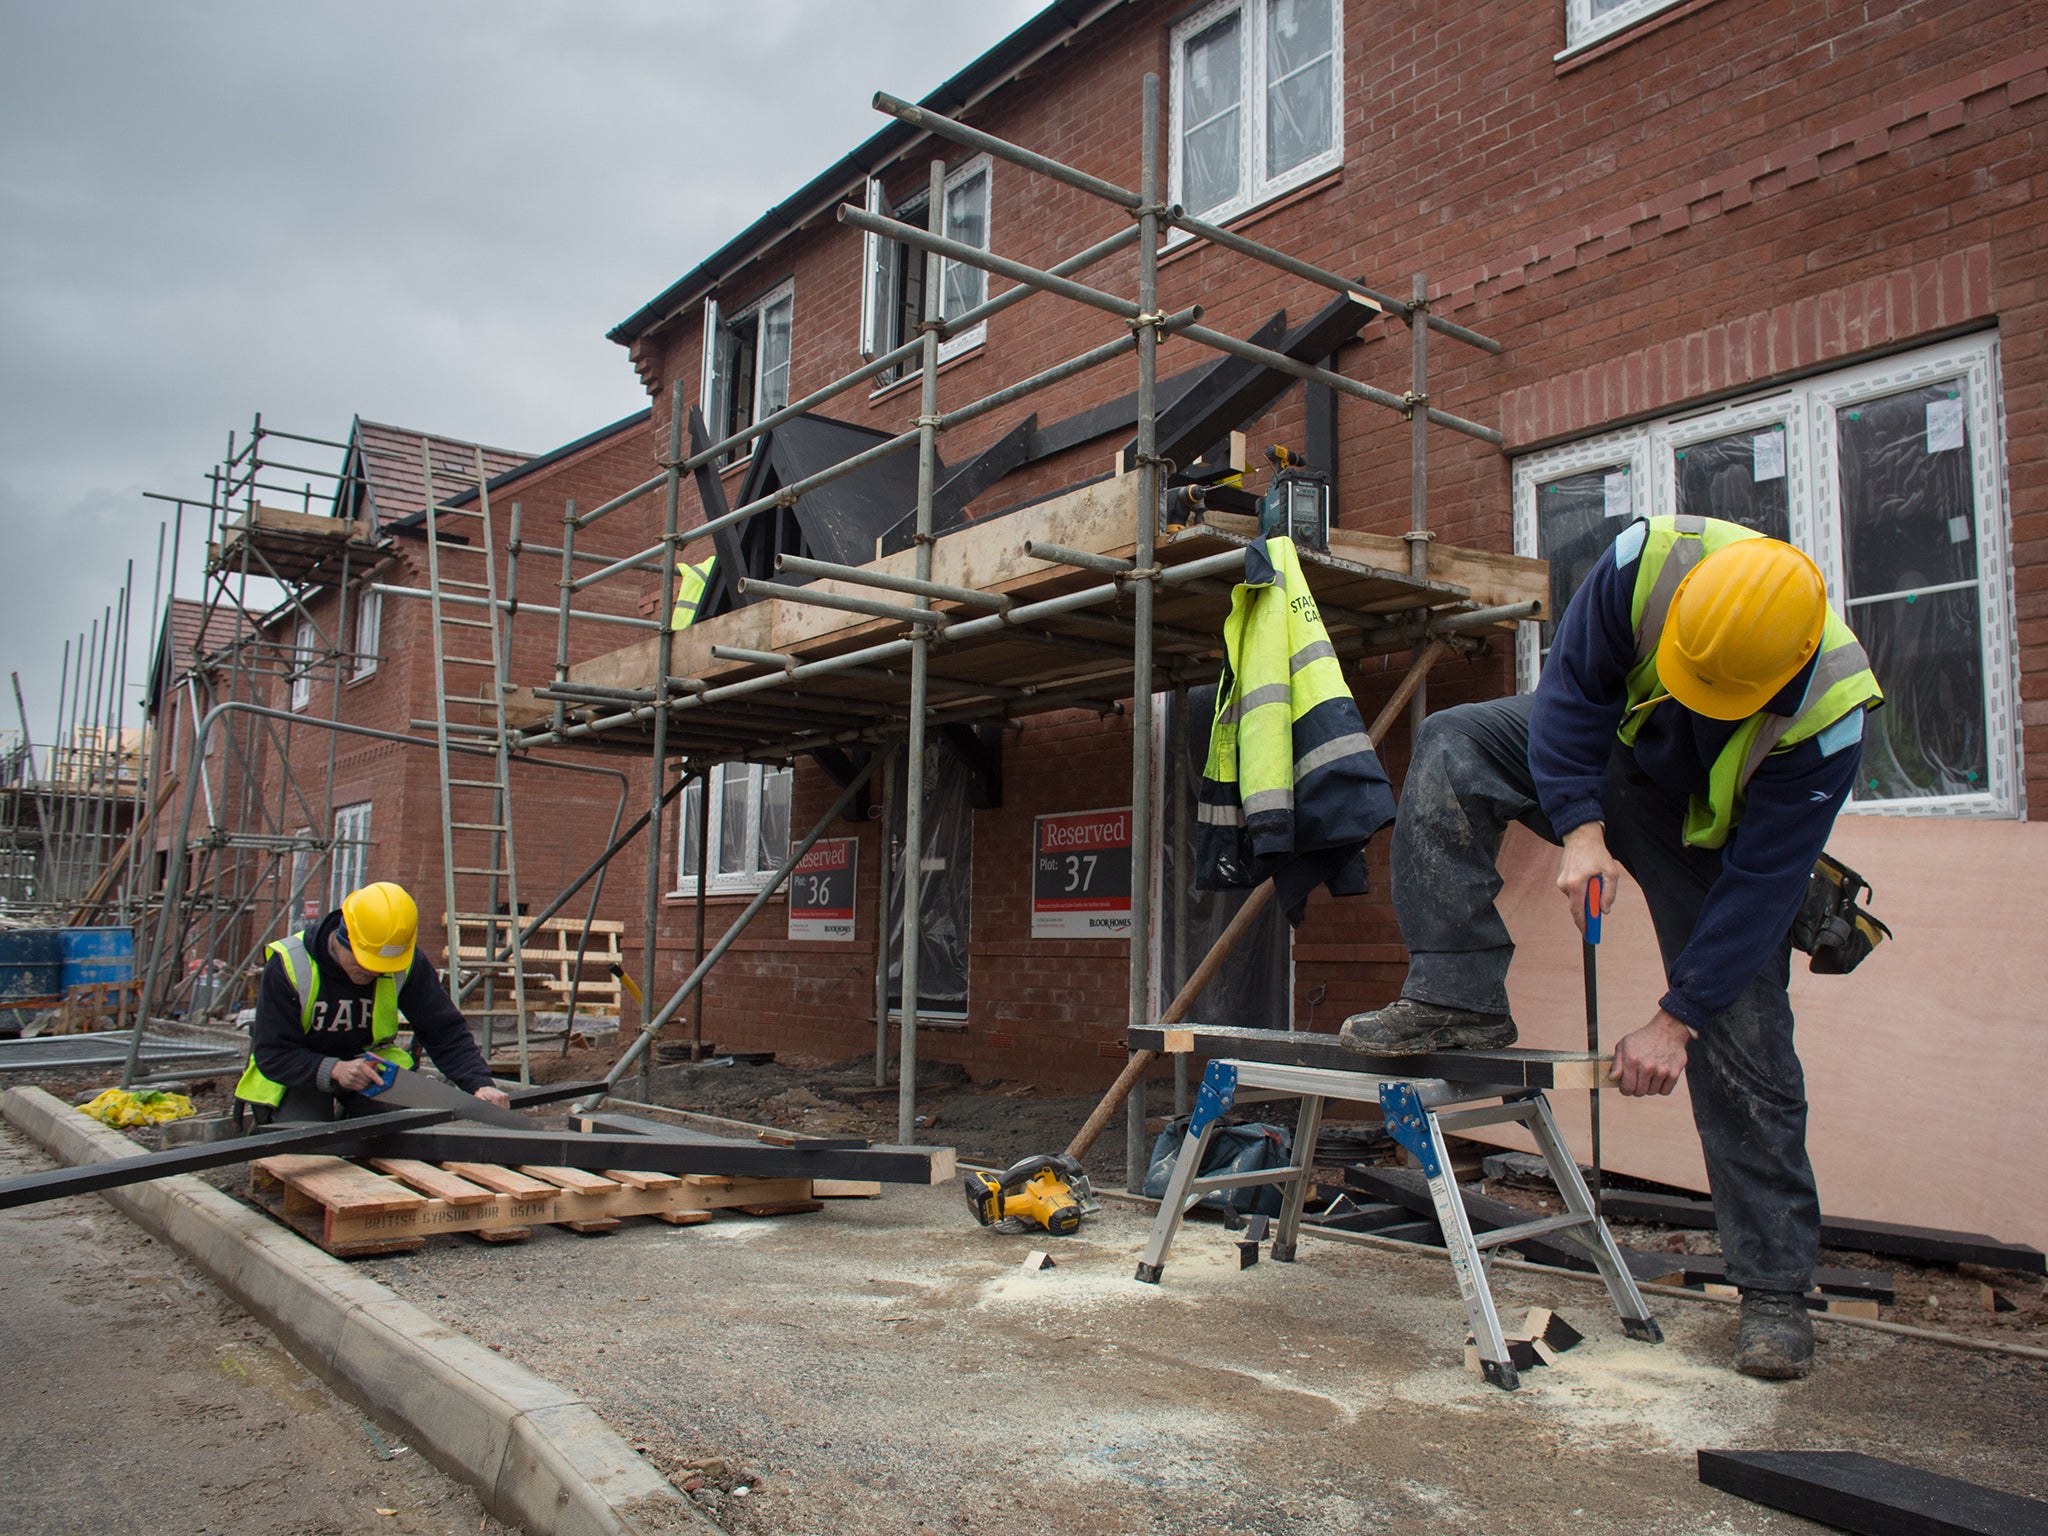 Construction is one of the sectors that has not improved over the past five years